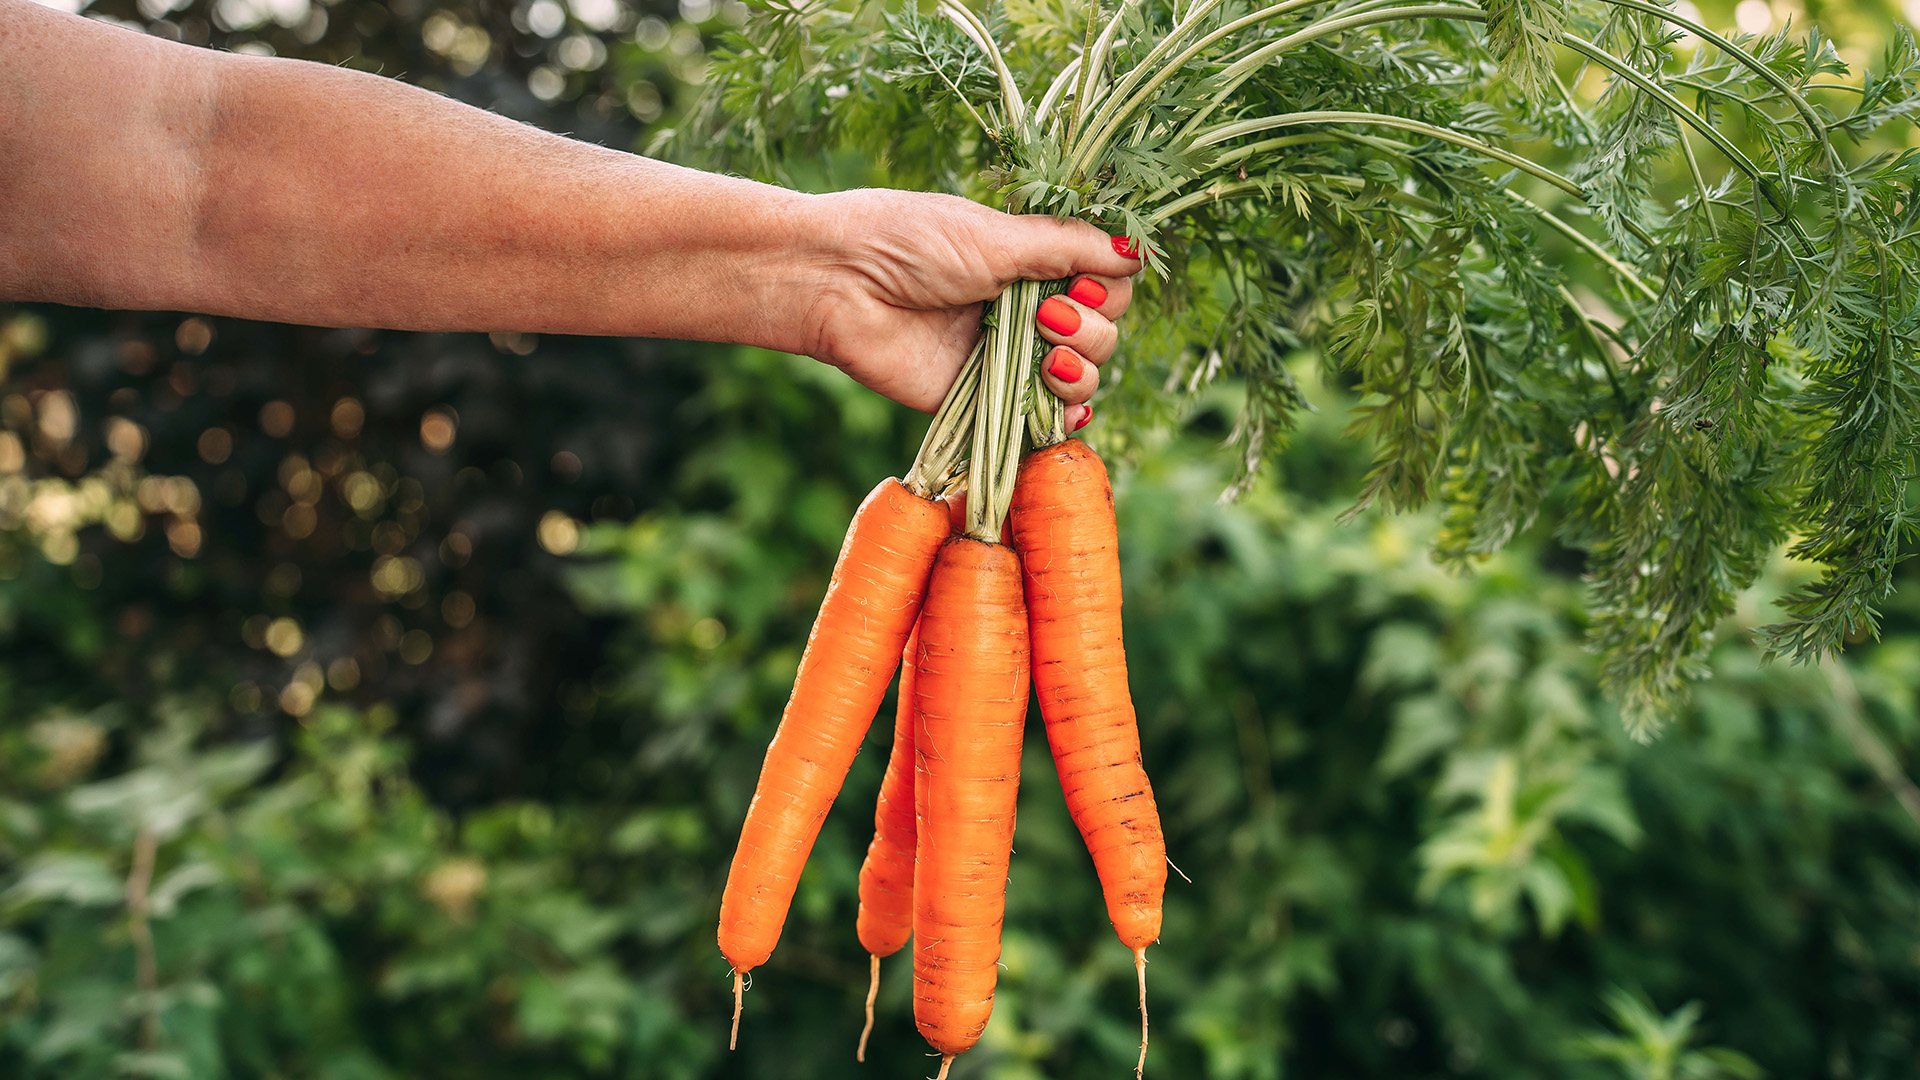 A hand with painted nails holds a freshly harvested bunch of carrots by their green tops. The background consists of lush greenery, indicating this might be a garden or farm setting. It’s the perfect scene to imagine the benefits of a Whole Foods Coop Membership, connecting you to fresh produce from local farms.